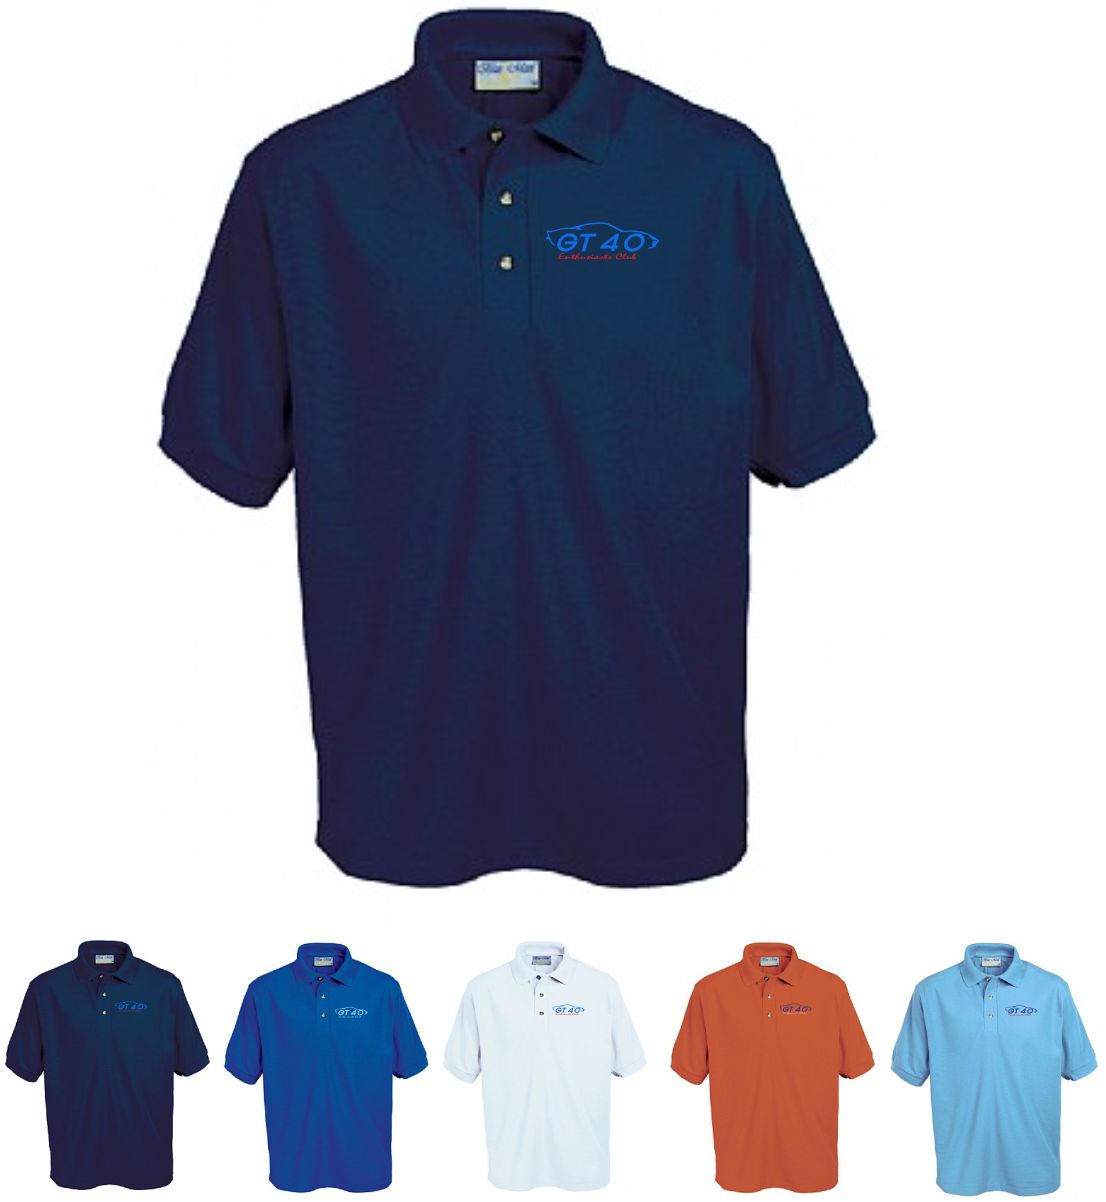 GT40 Enthusiasts Polo Shirt